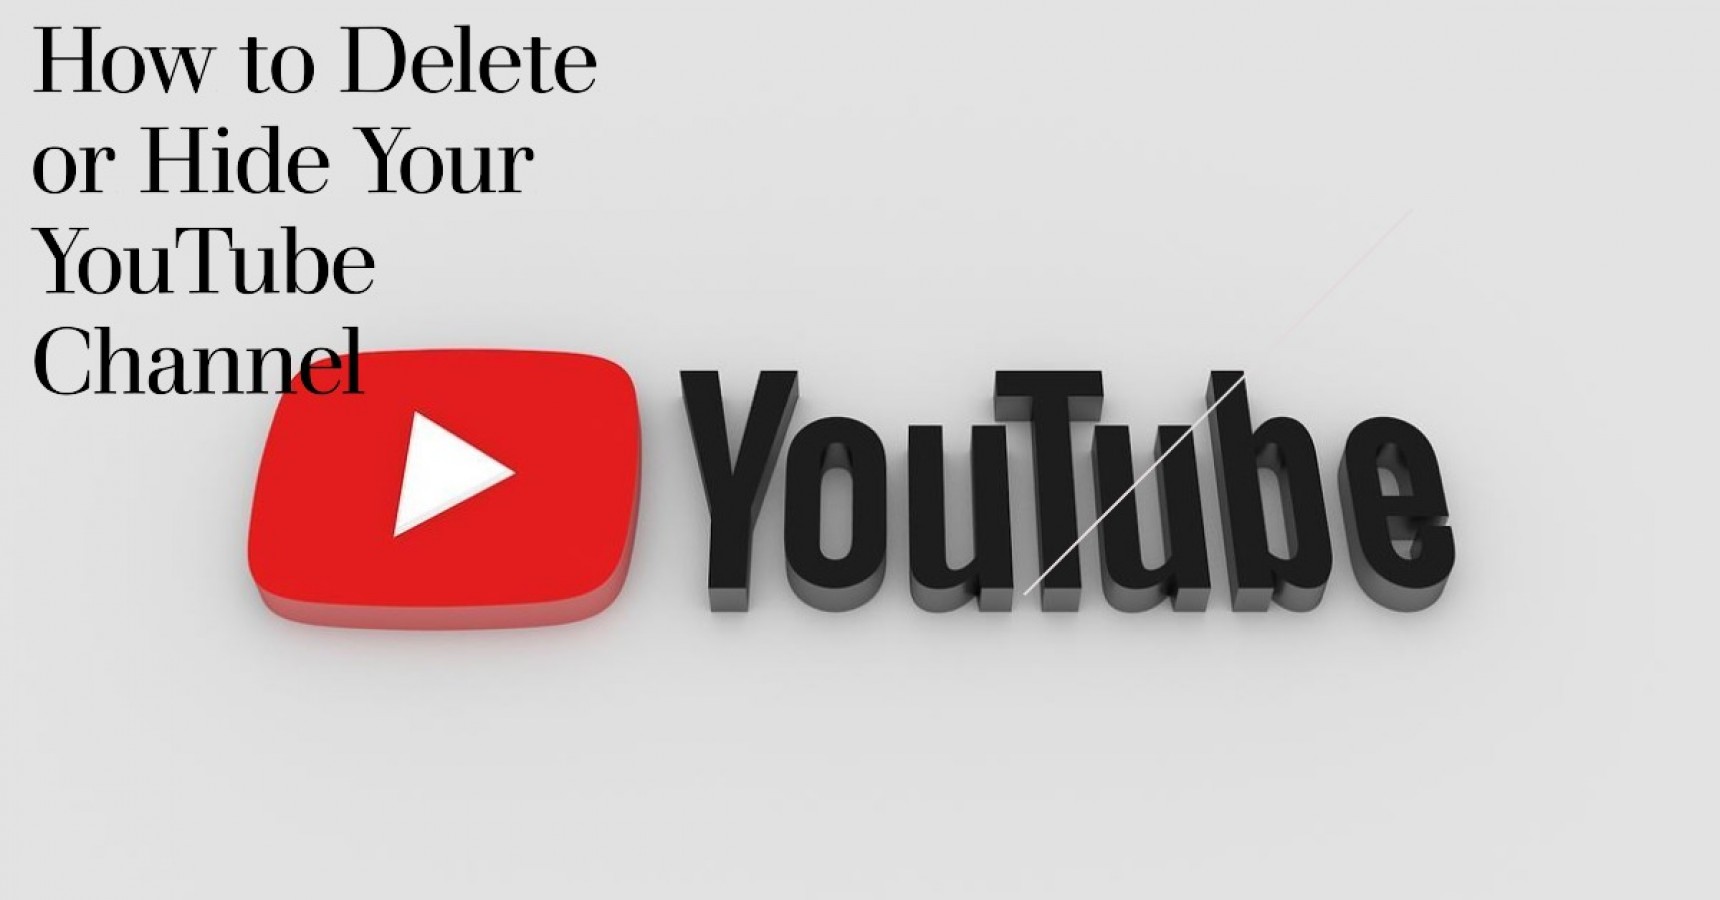 How to delete YouTube Channel